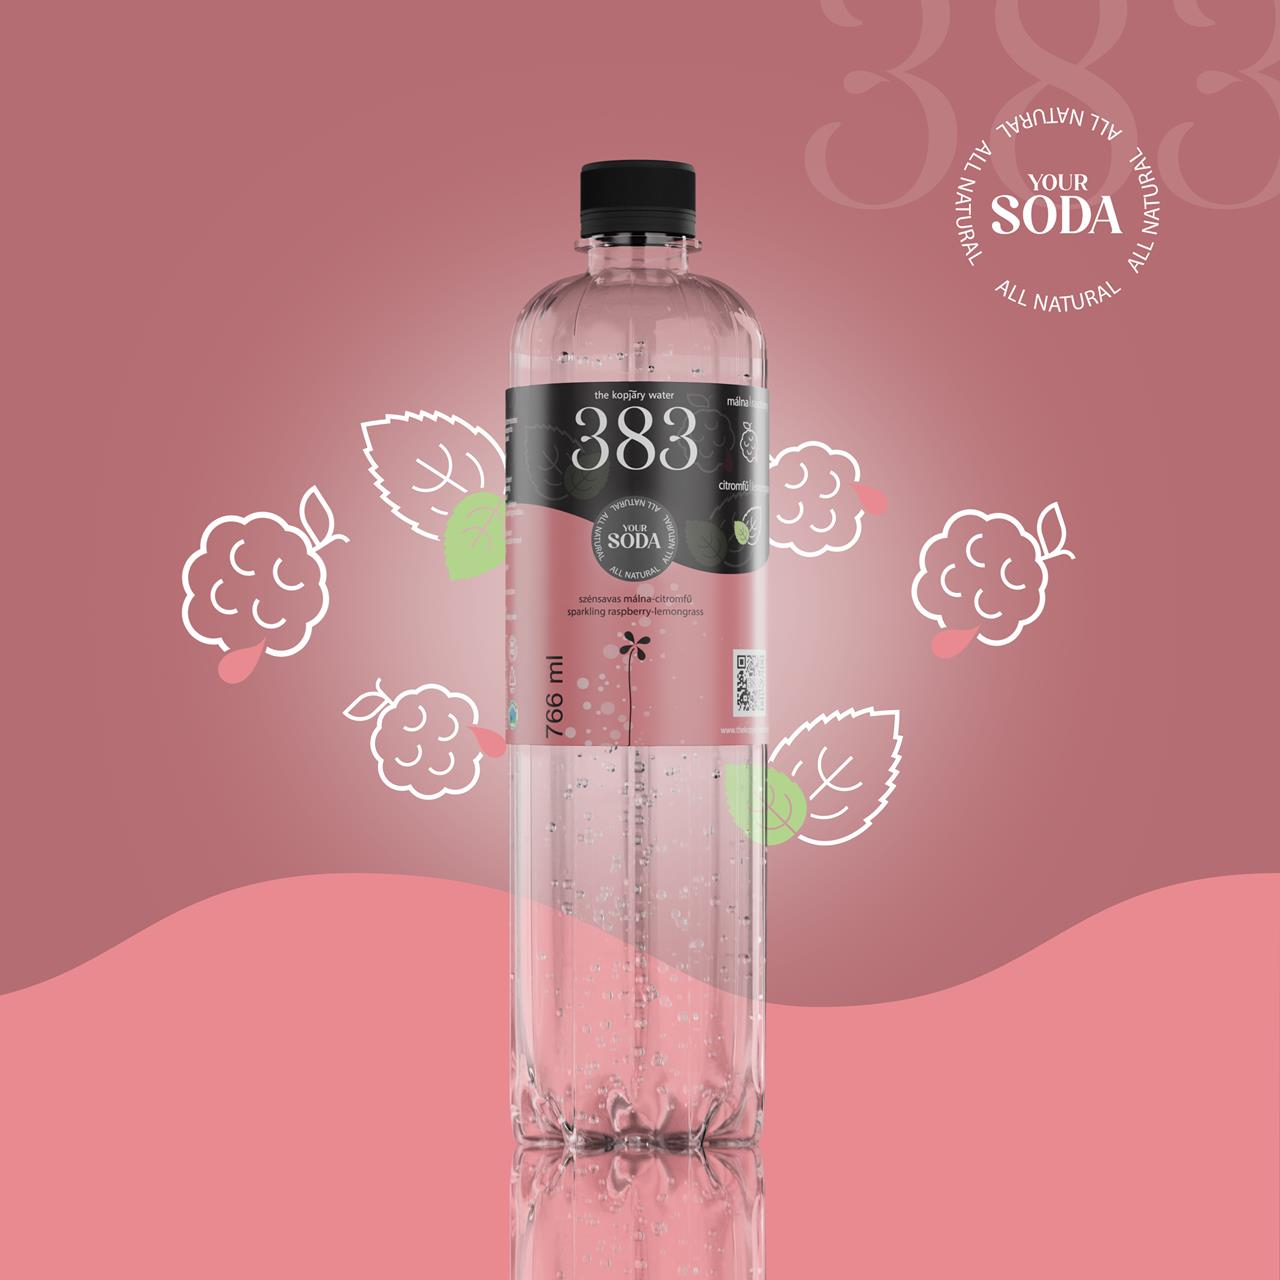 383 THE KOPJARY WATER raspberry-lemongrass flavored, carbonated, 766 ml